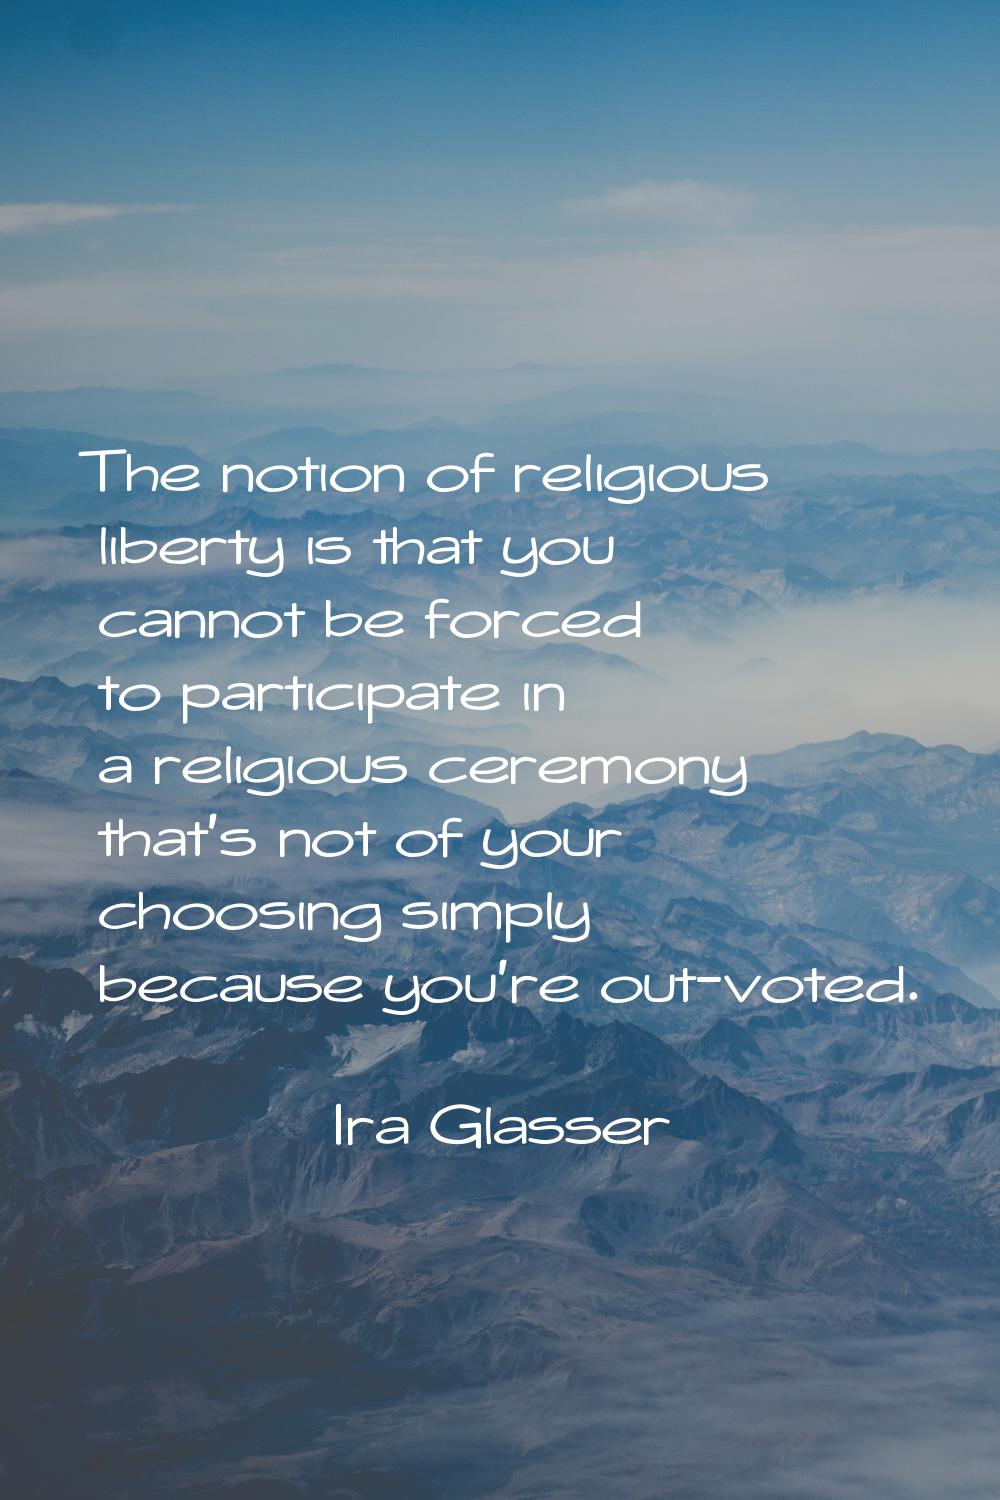 The notion of religious liberty is that you cannot be forced to participate in a religious ceremony